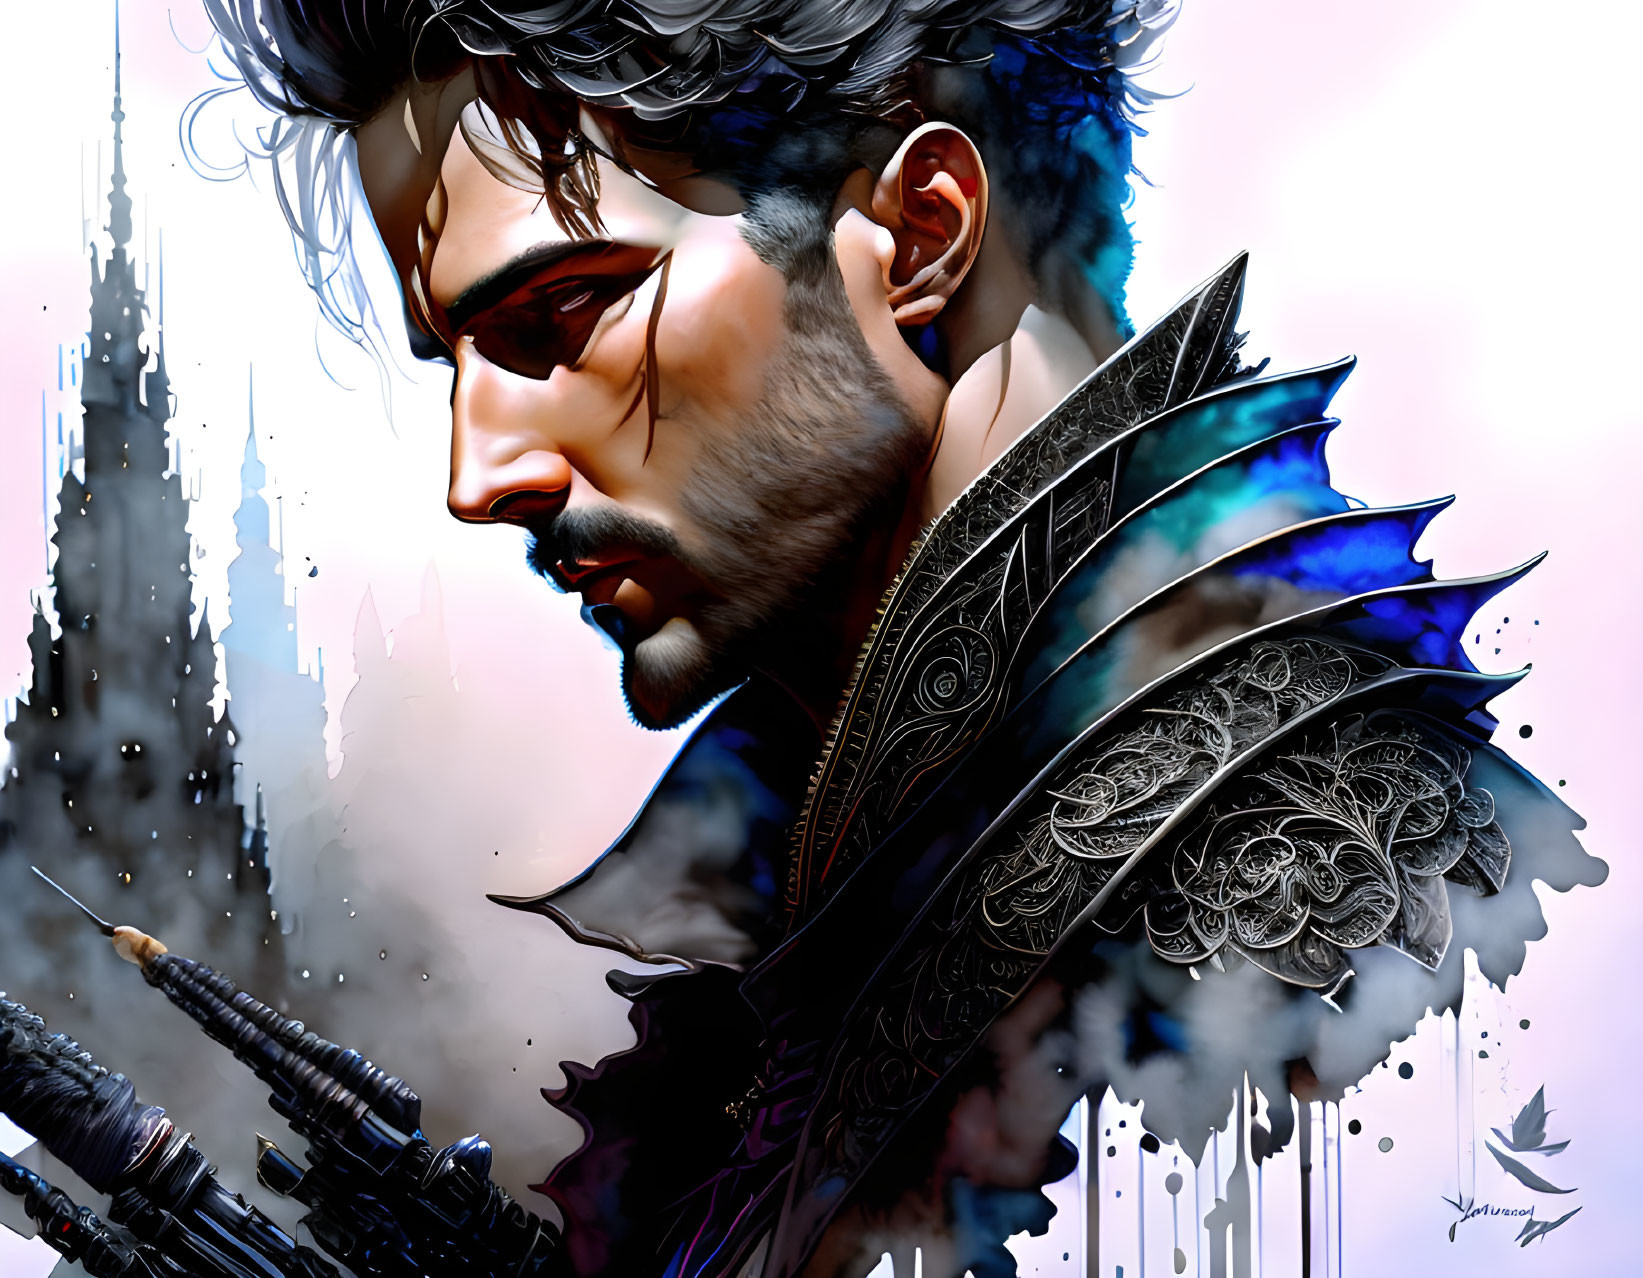 Fantasy male warrior with dark hair and ornate armor in castle spires setting